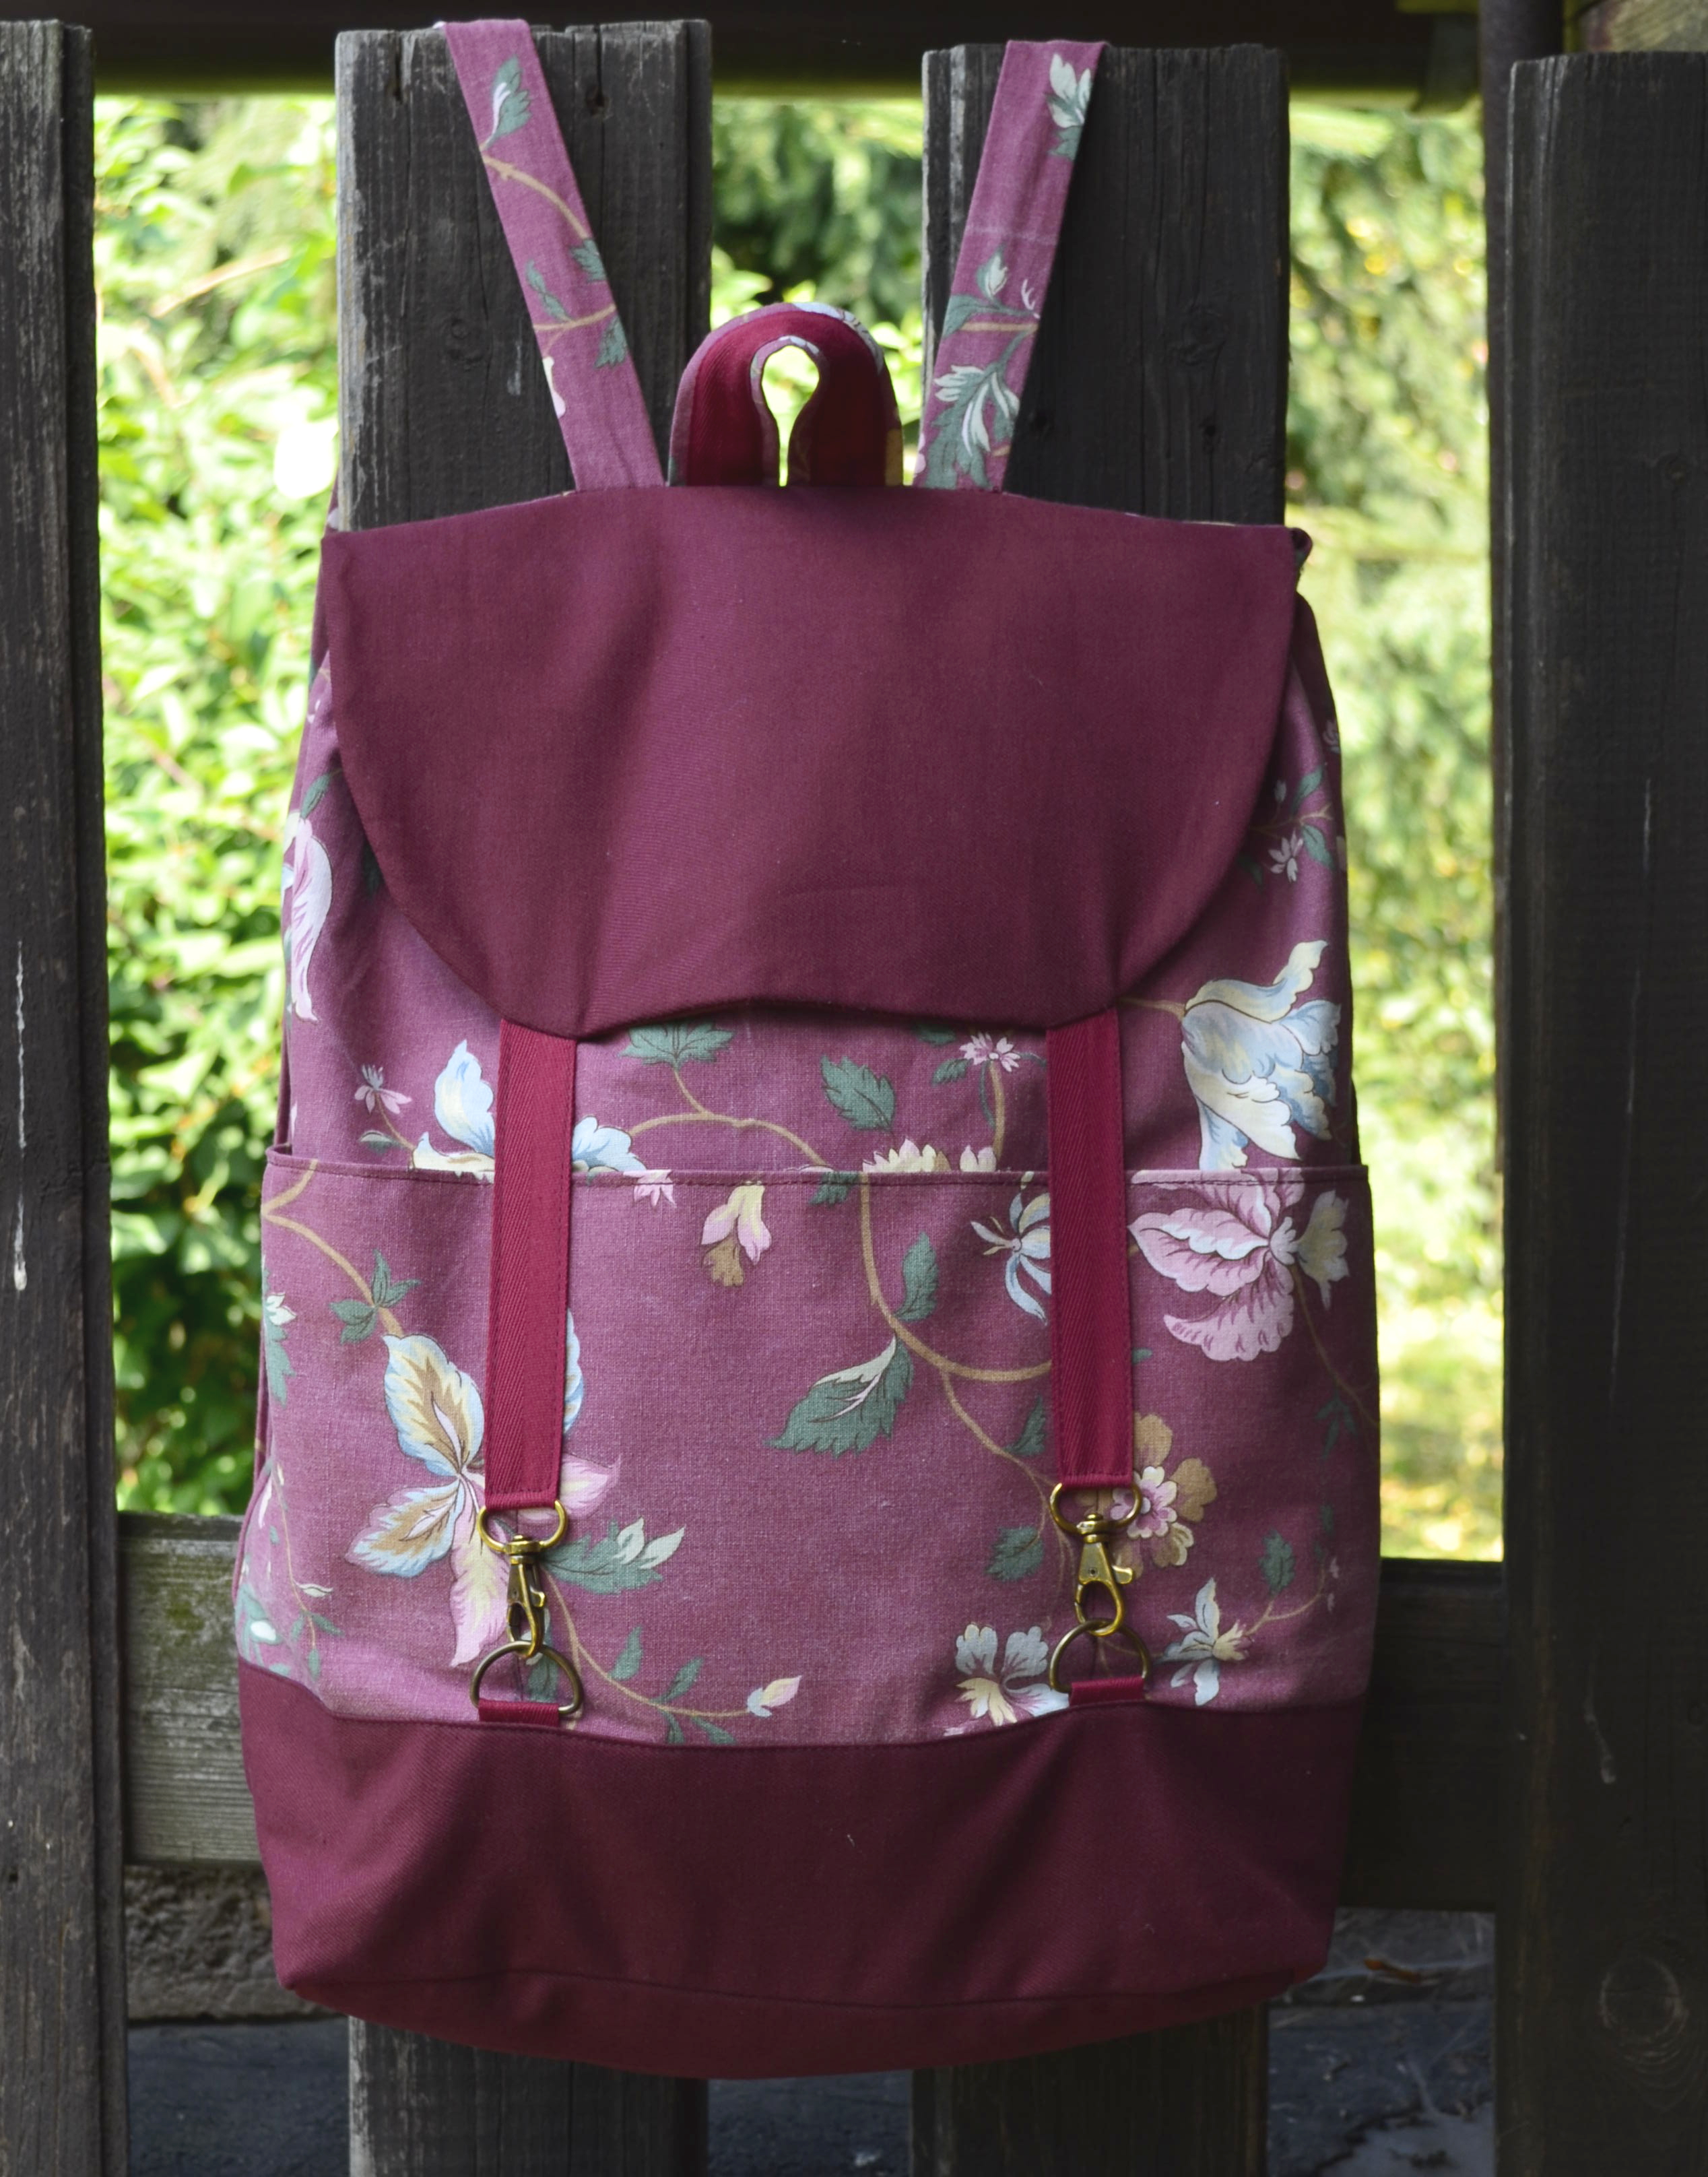 Very First Backpack – Sewing Projects | BurdaStyle.com